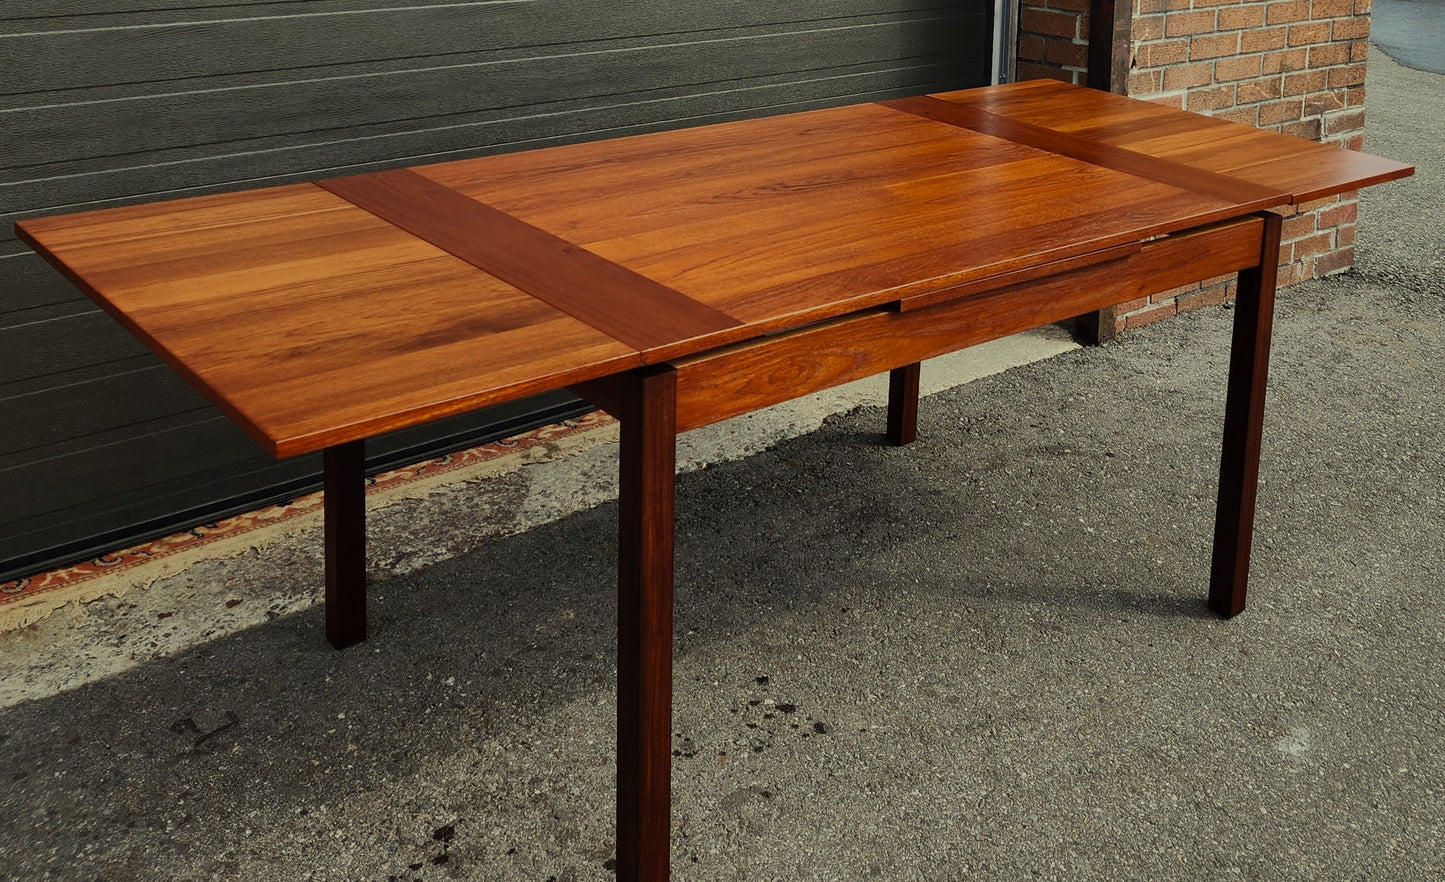 REFINISHED Mid Century Modern Teak Table Draw Leaf by RS Associates 51"-82"